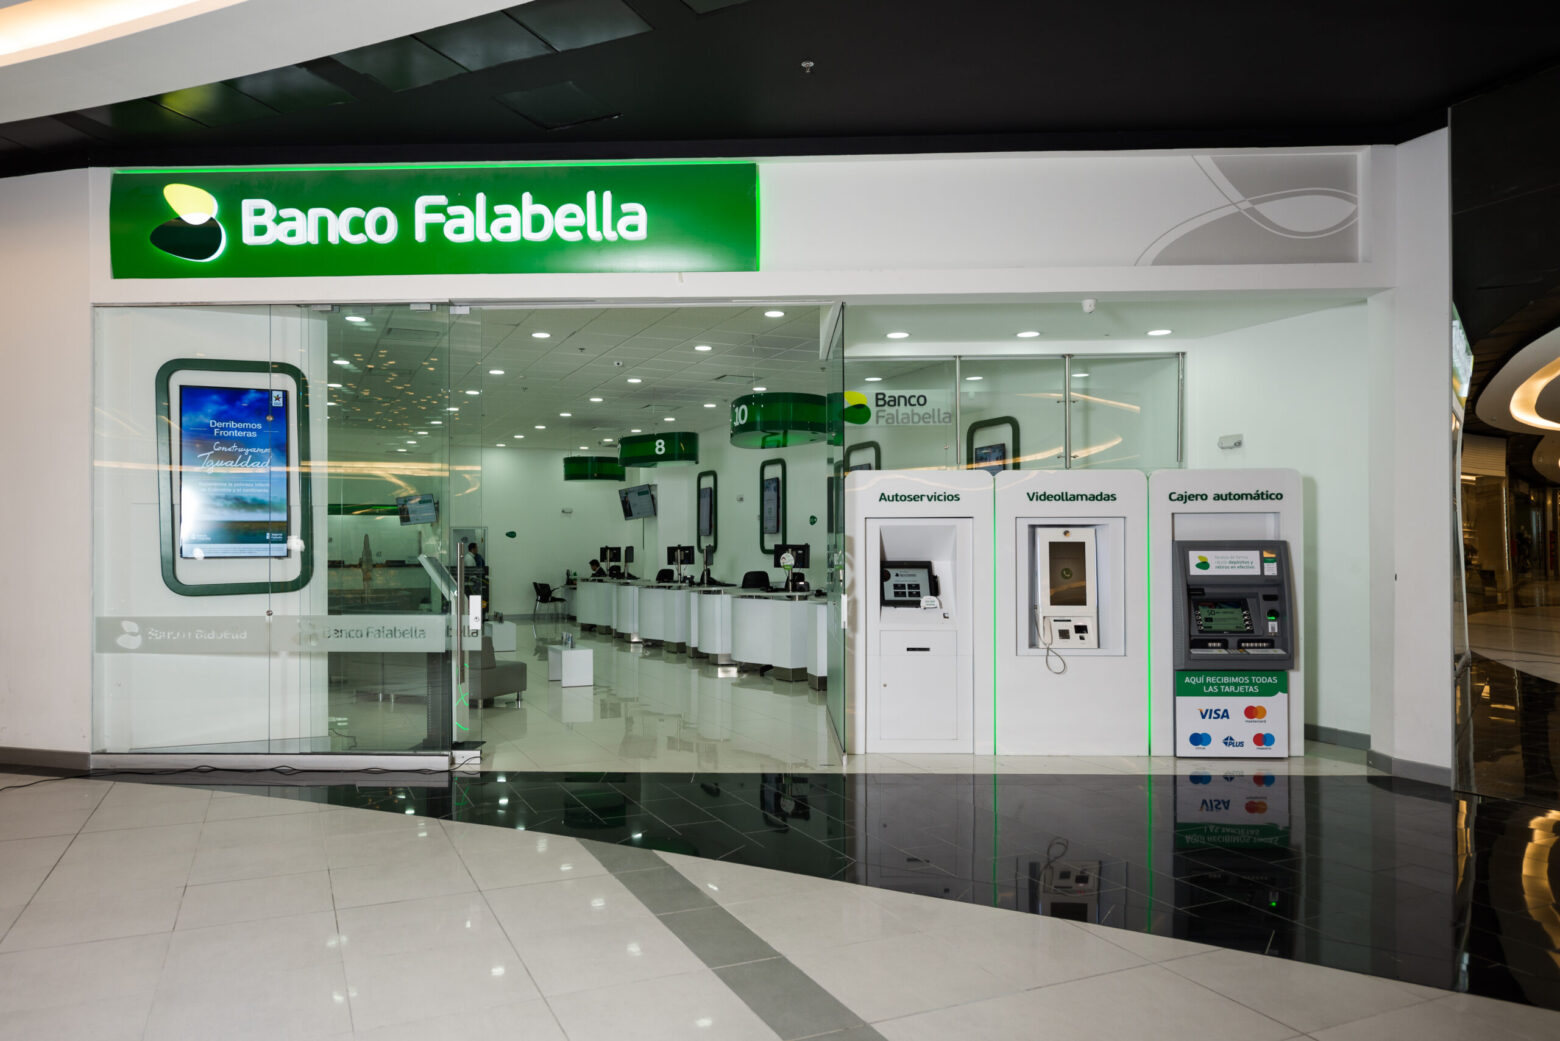 Banco Falabella – The Growth of Digital Financial Solutions